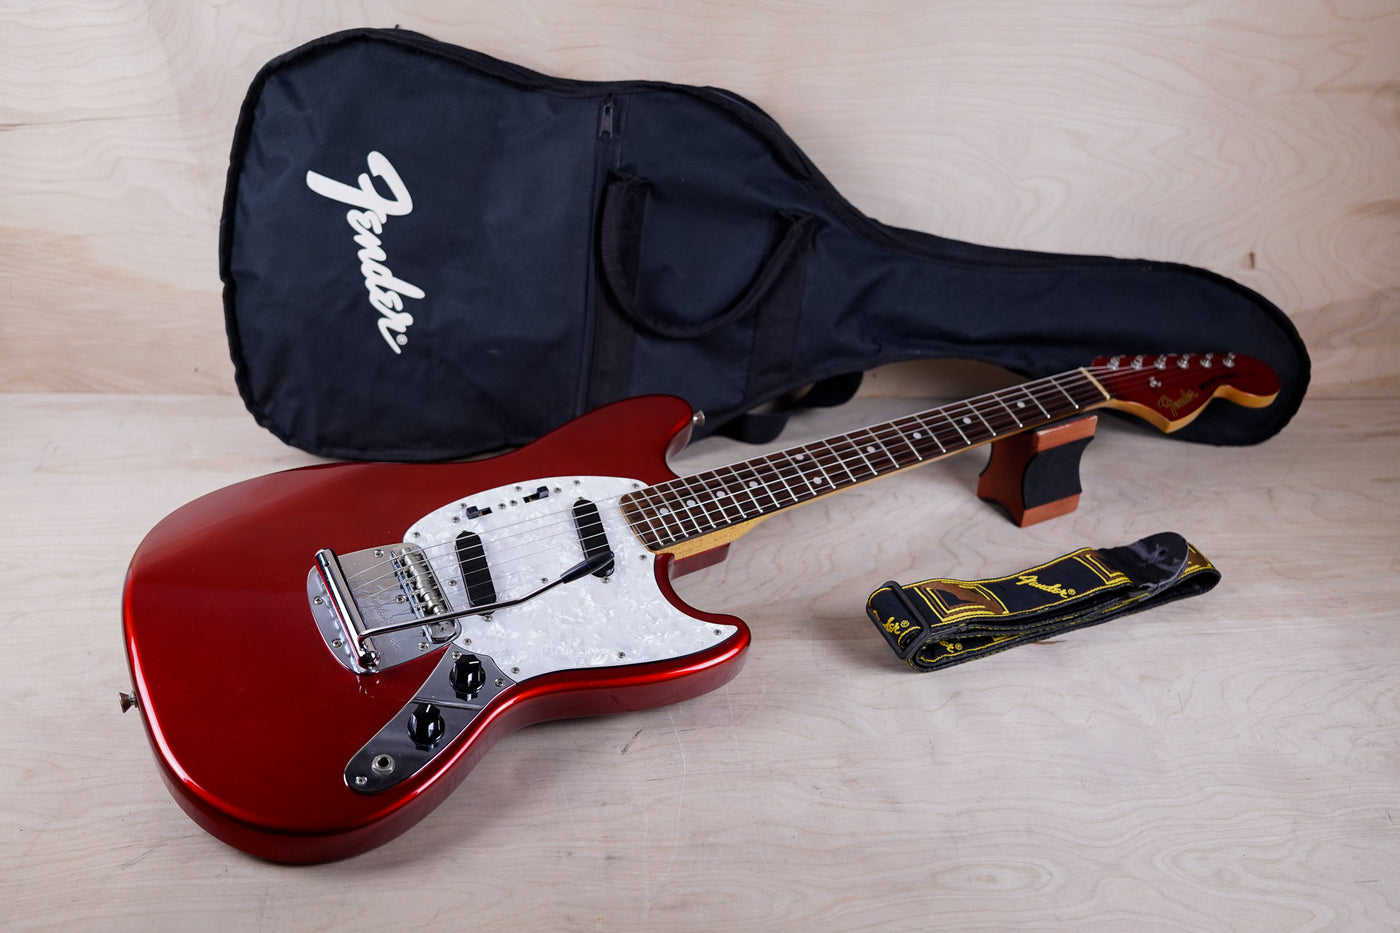 Fender MG-69 Mustang Reissue MIJ 2008 Candy Apple Red Matching Headstock Japan w/ Bag